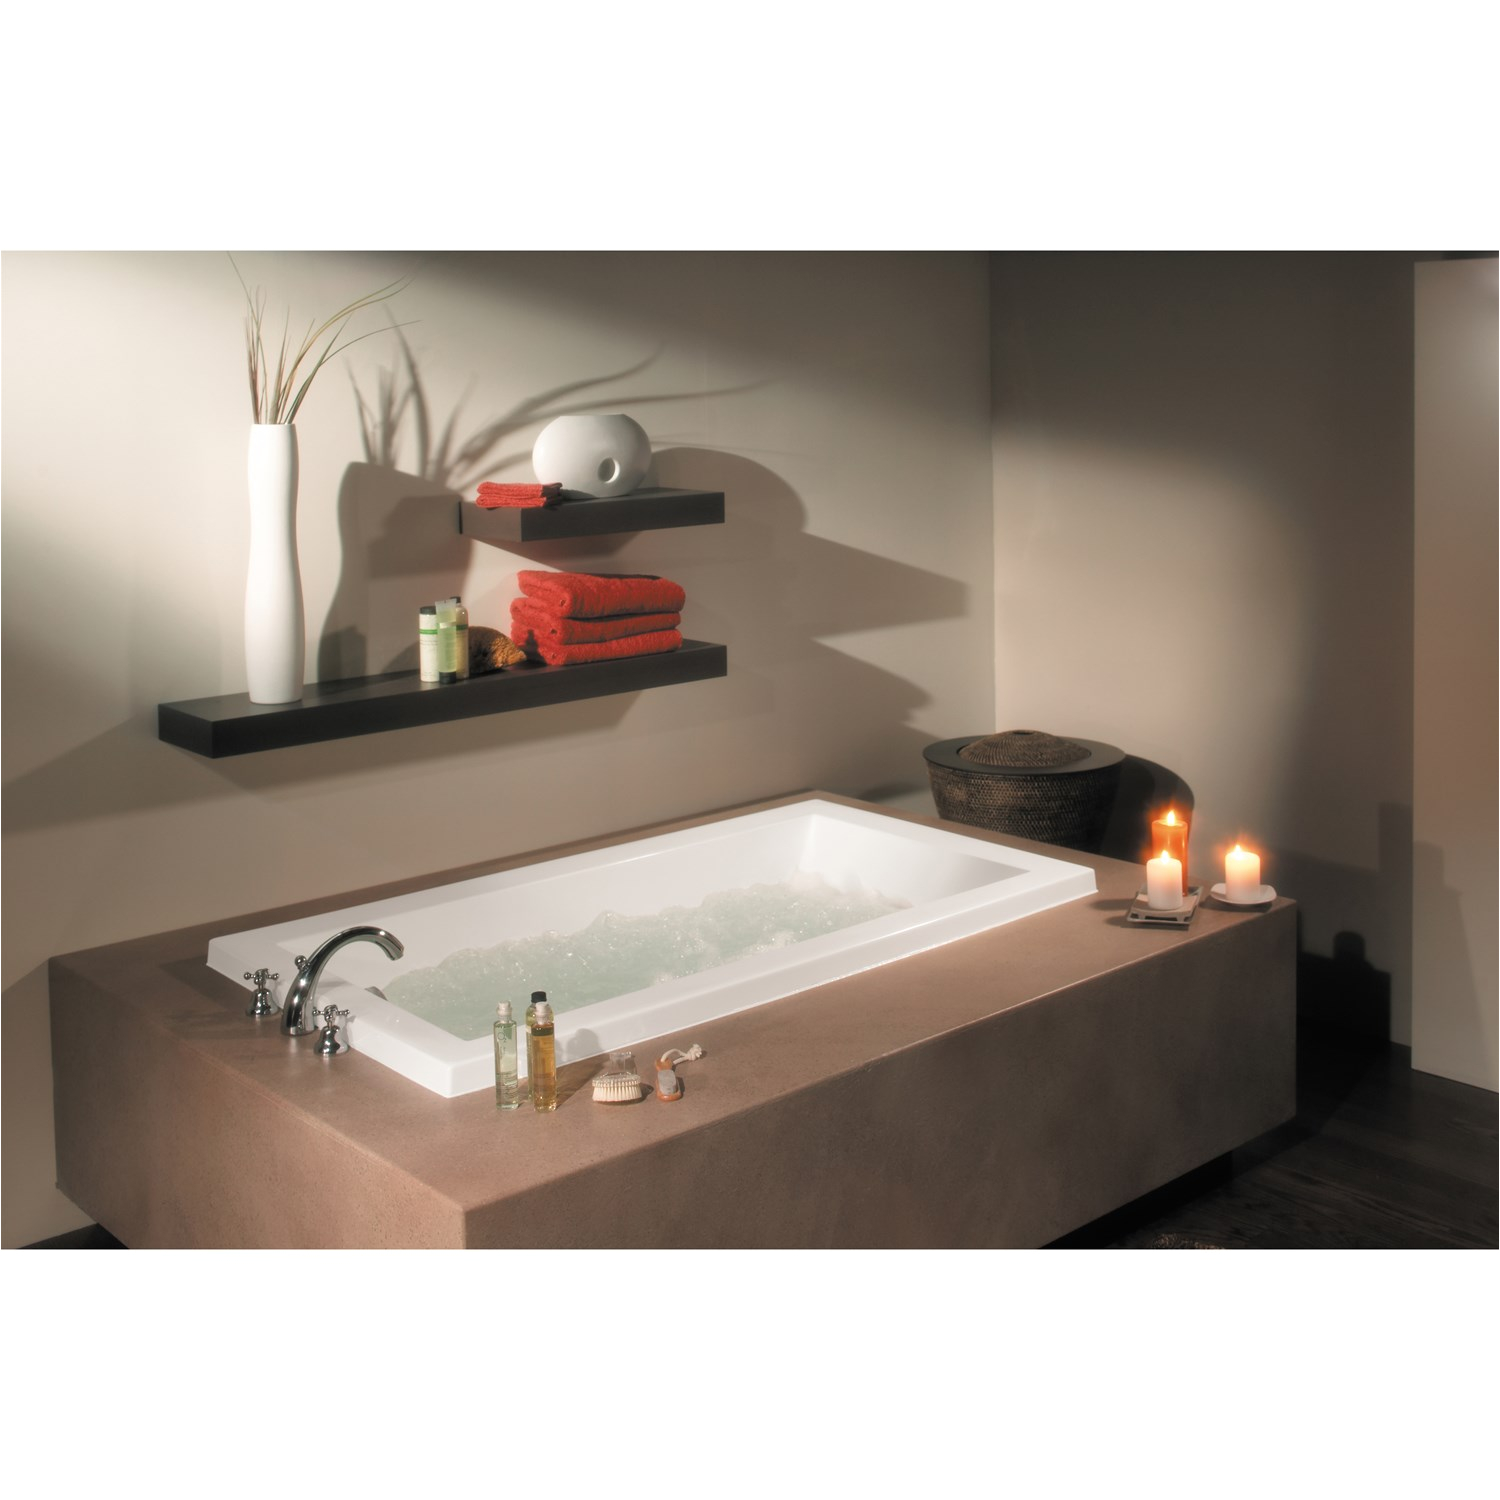 surround your bath in style with great bathtubs menards design